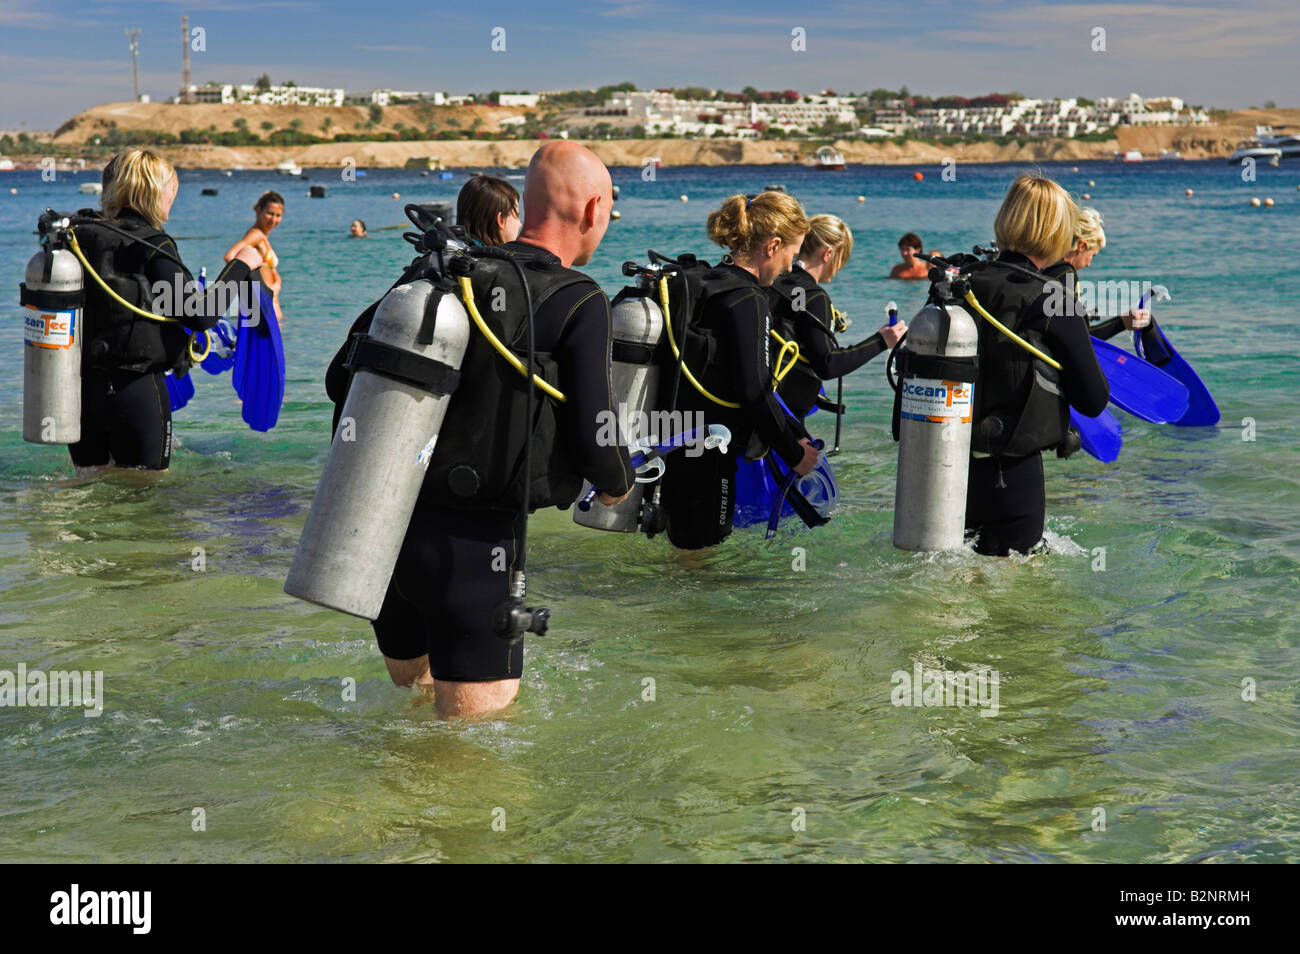 Group of Experience Scuba divers standing in the water Naama Bay Sharm el Sheikh Sinai Egypt December sun Stock Photo